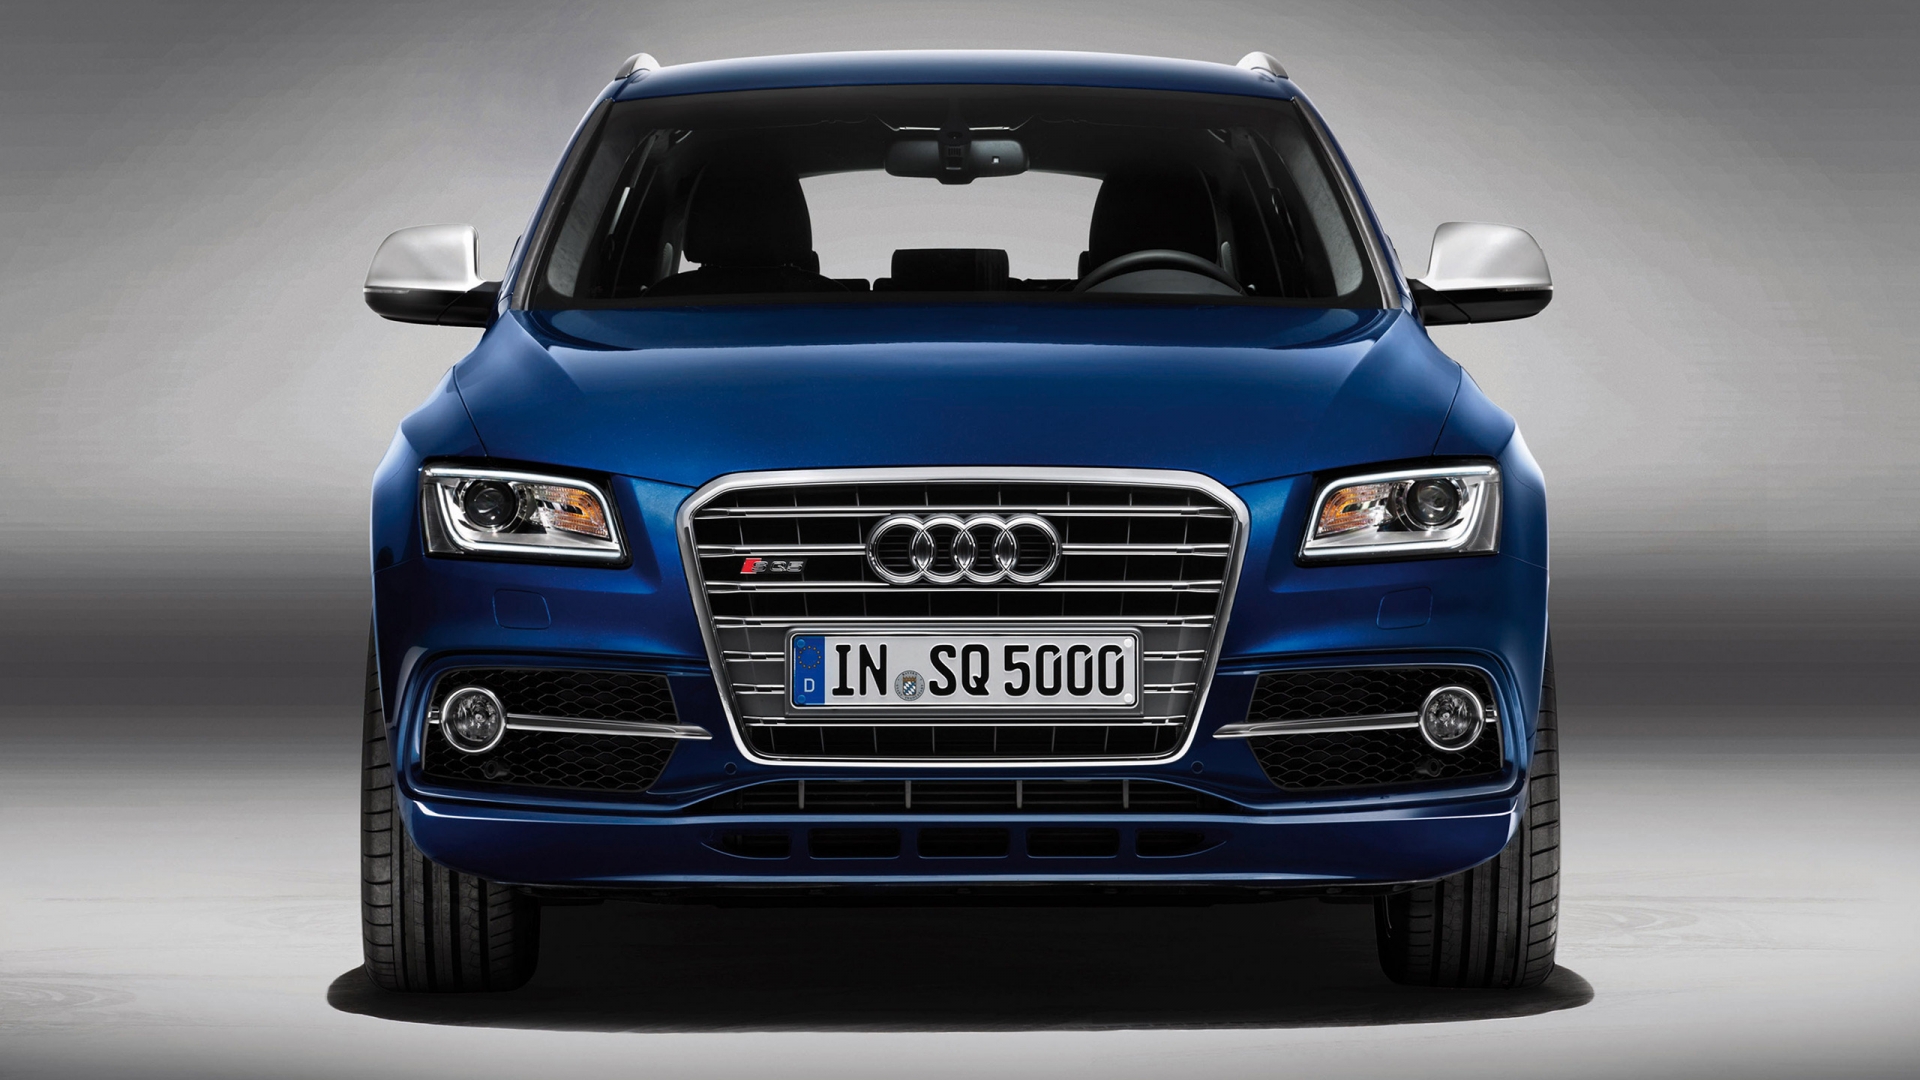 Blue Audi SQ5 TDI Front for 1920 x 1080 HDTV 1080p resolution